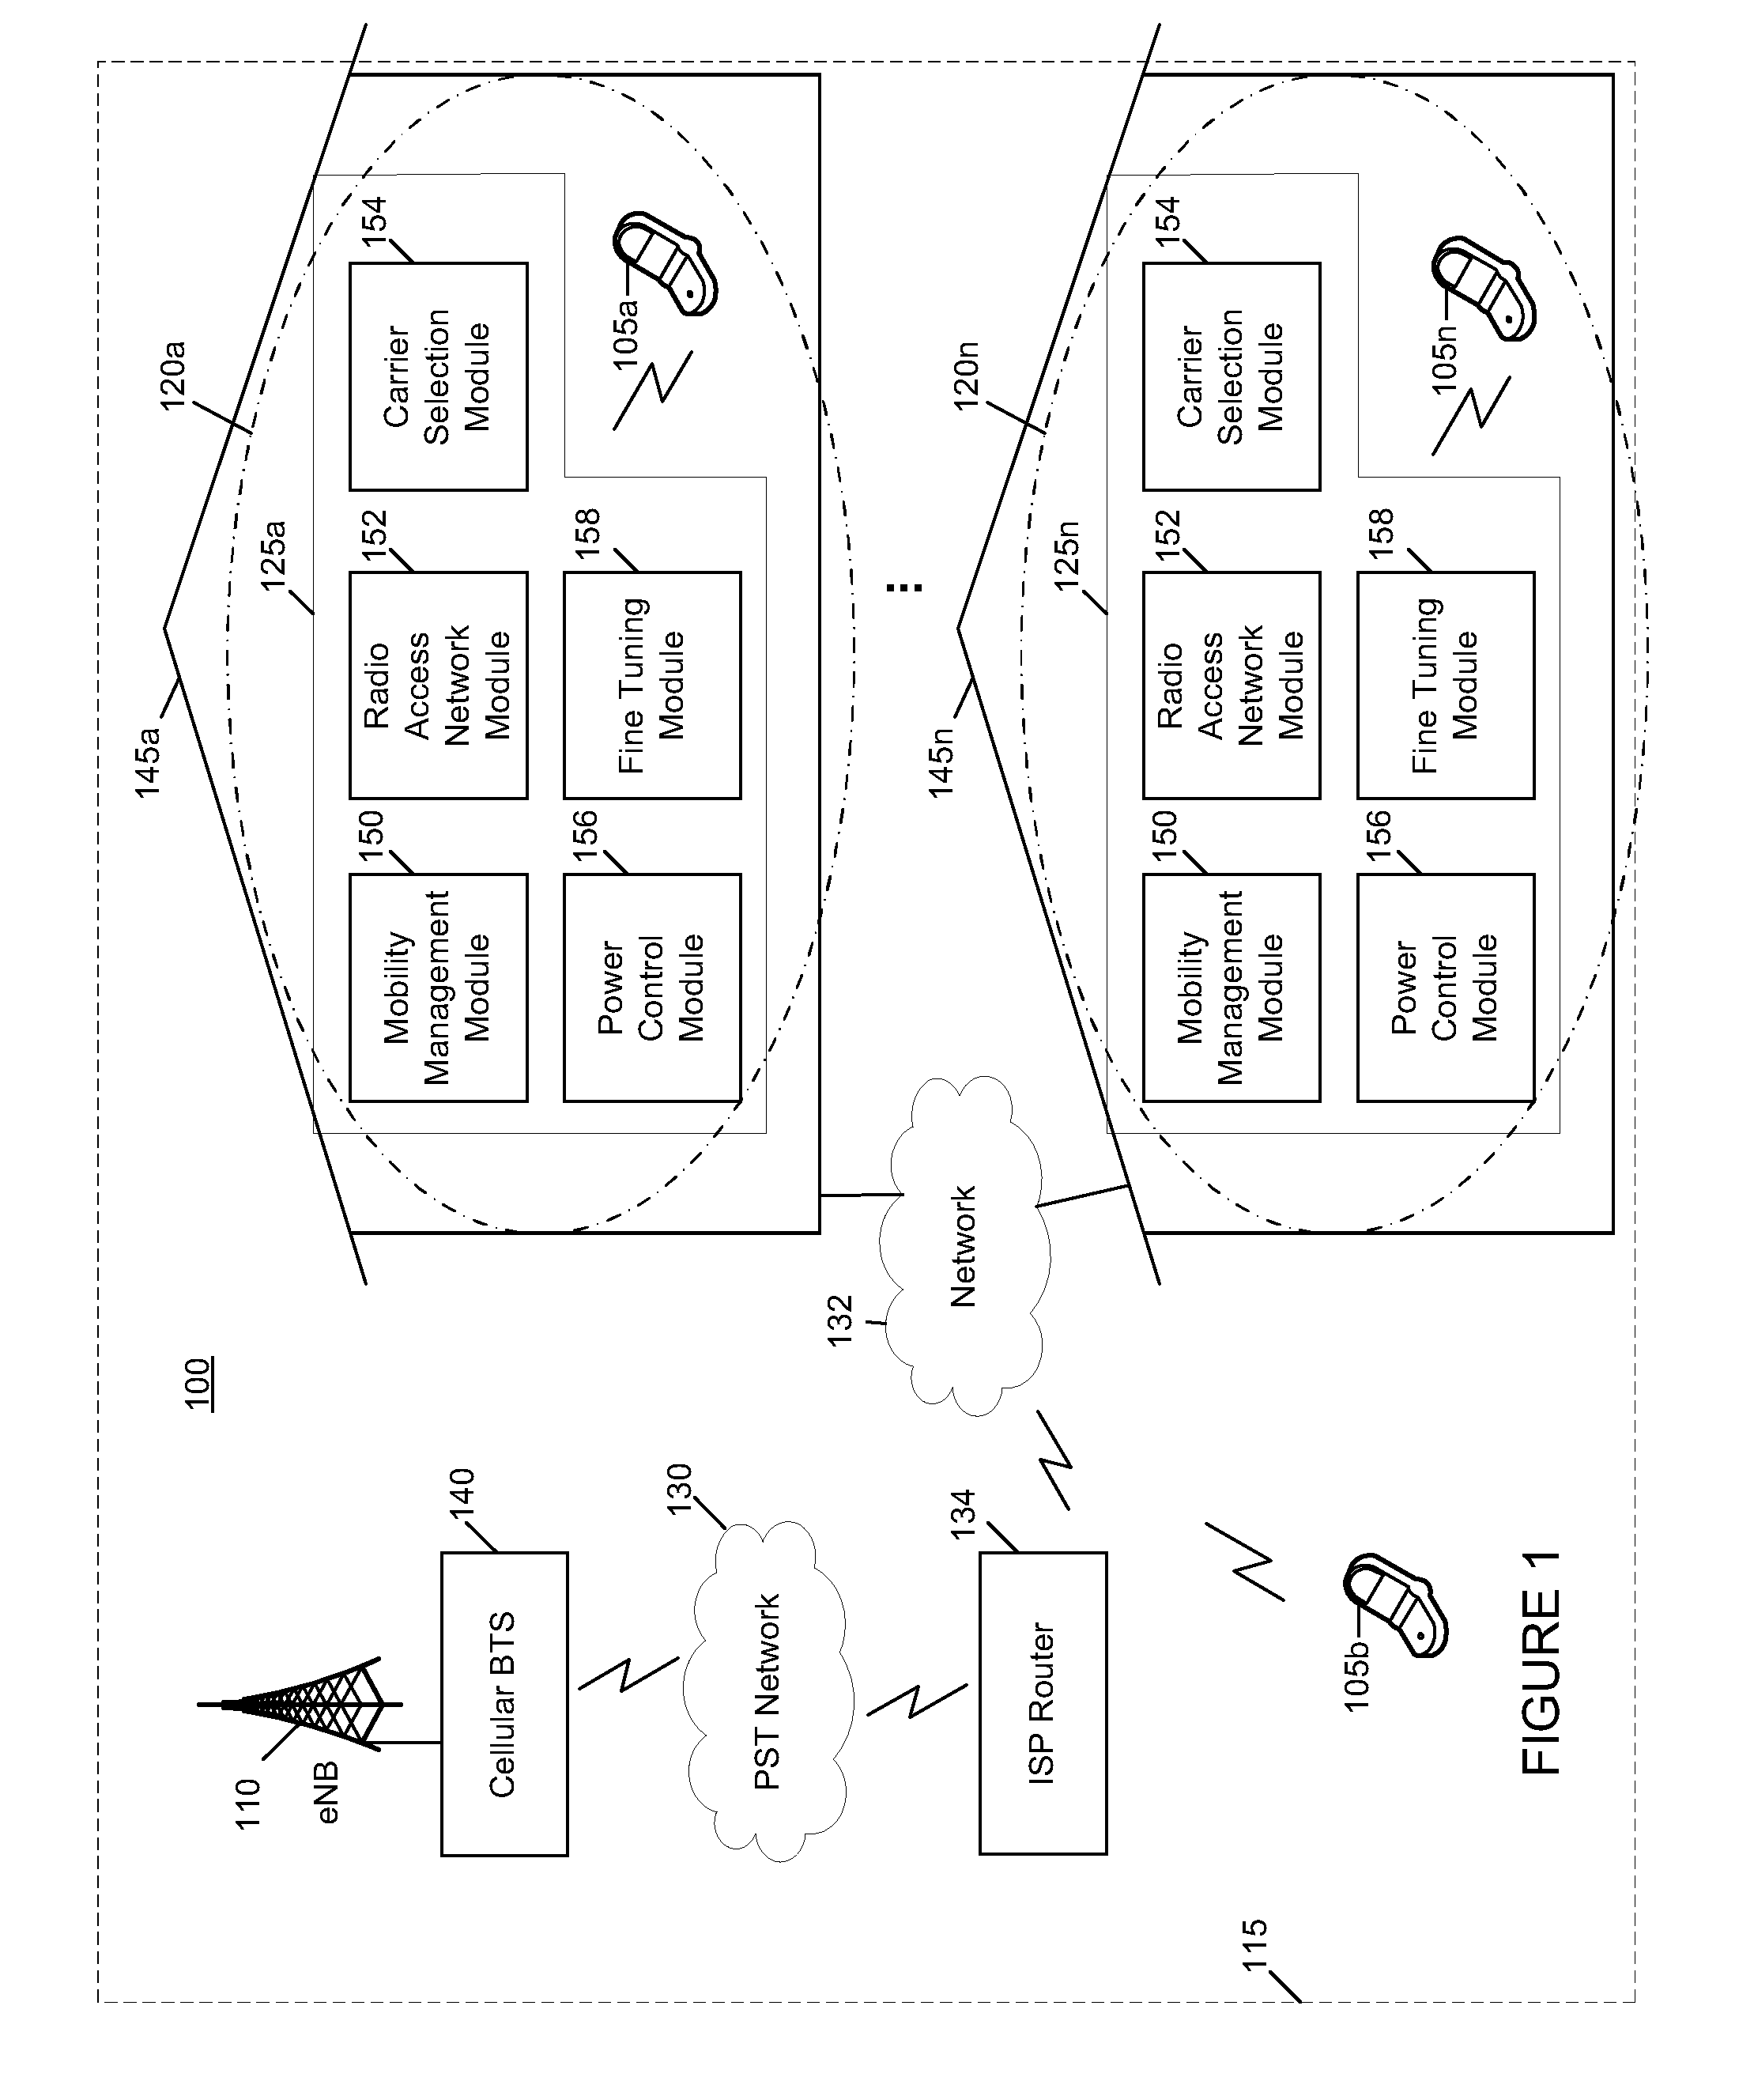 Method for controlling interference in femto cell deployments